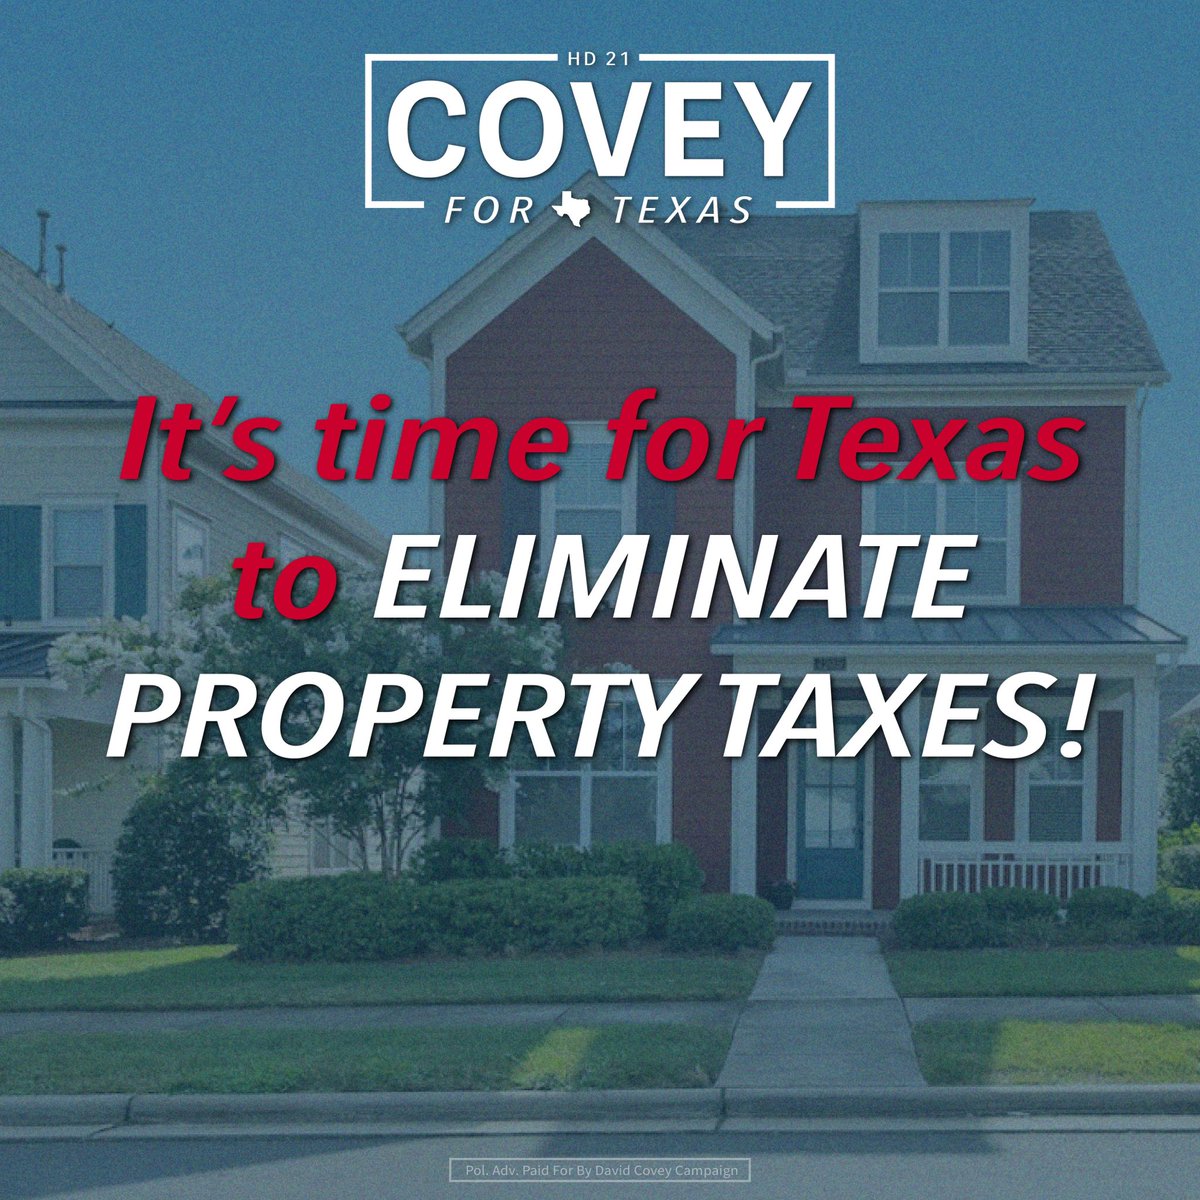 Texans have been renting their homes from the government for too long, Texans deserve to truly OWN THEIR HOMES.